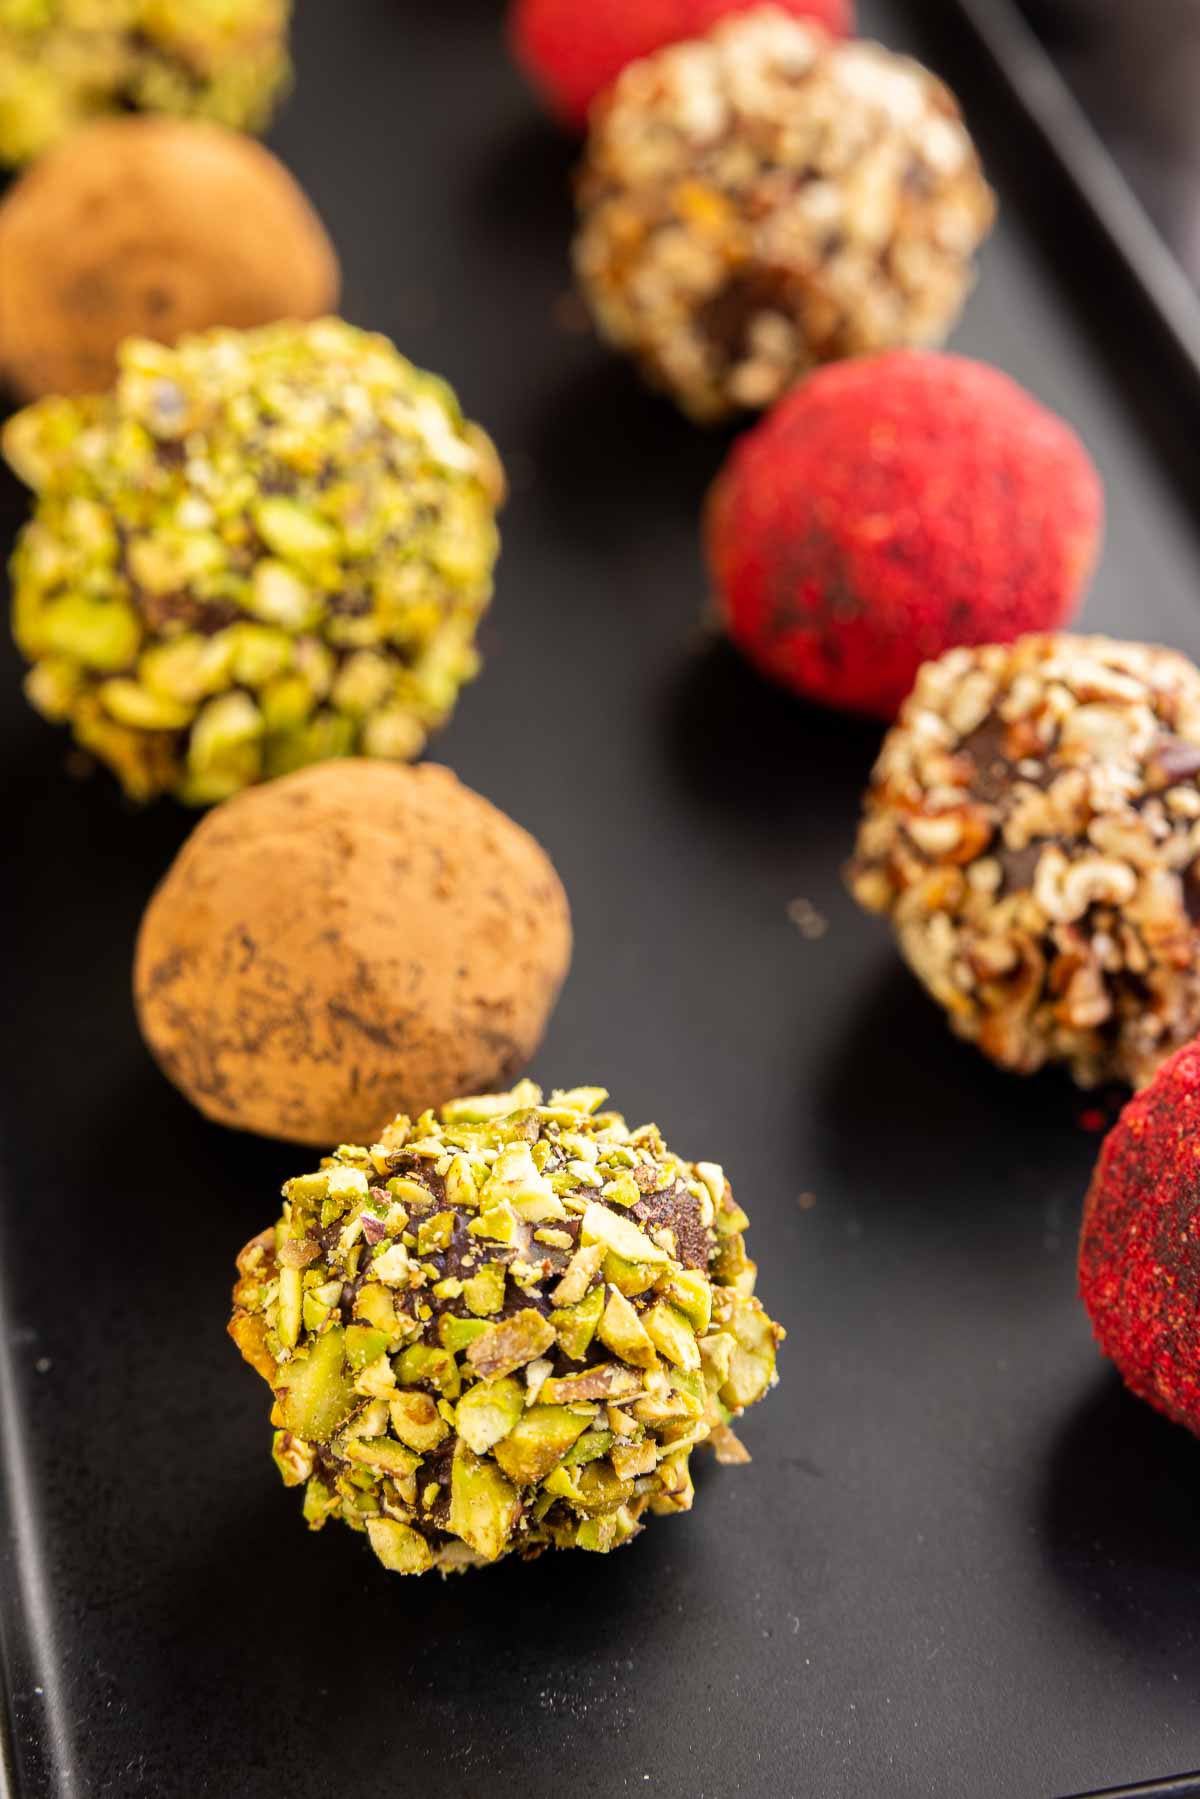 Chocolate Truffles rolled in pistachio and cocoa powder